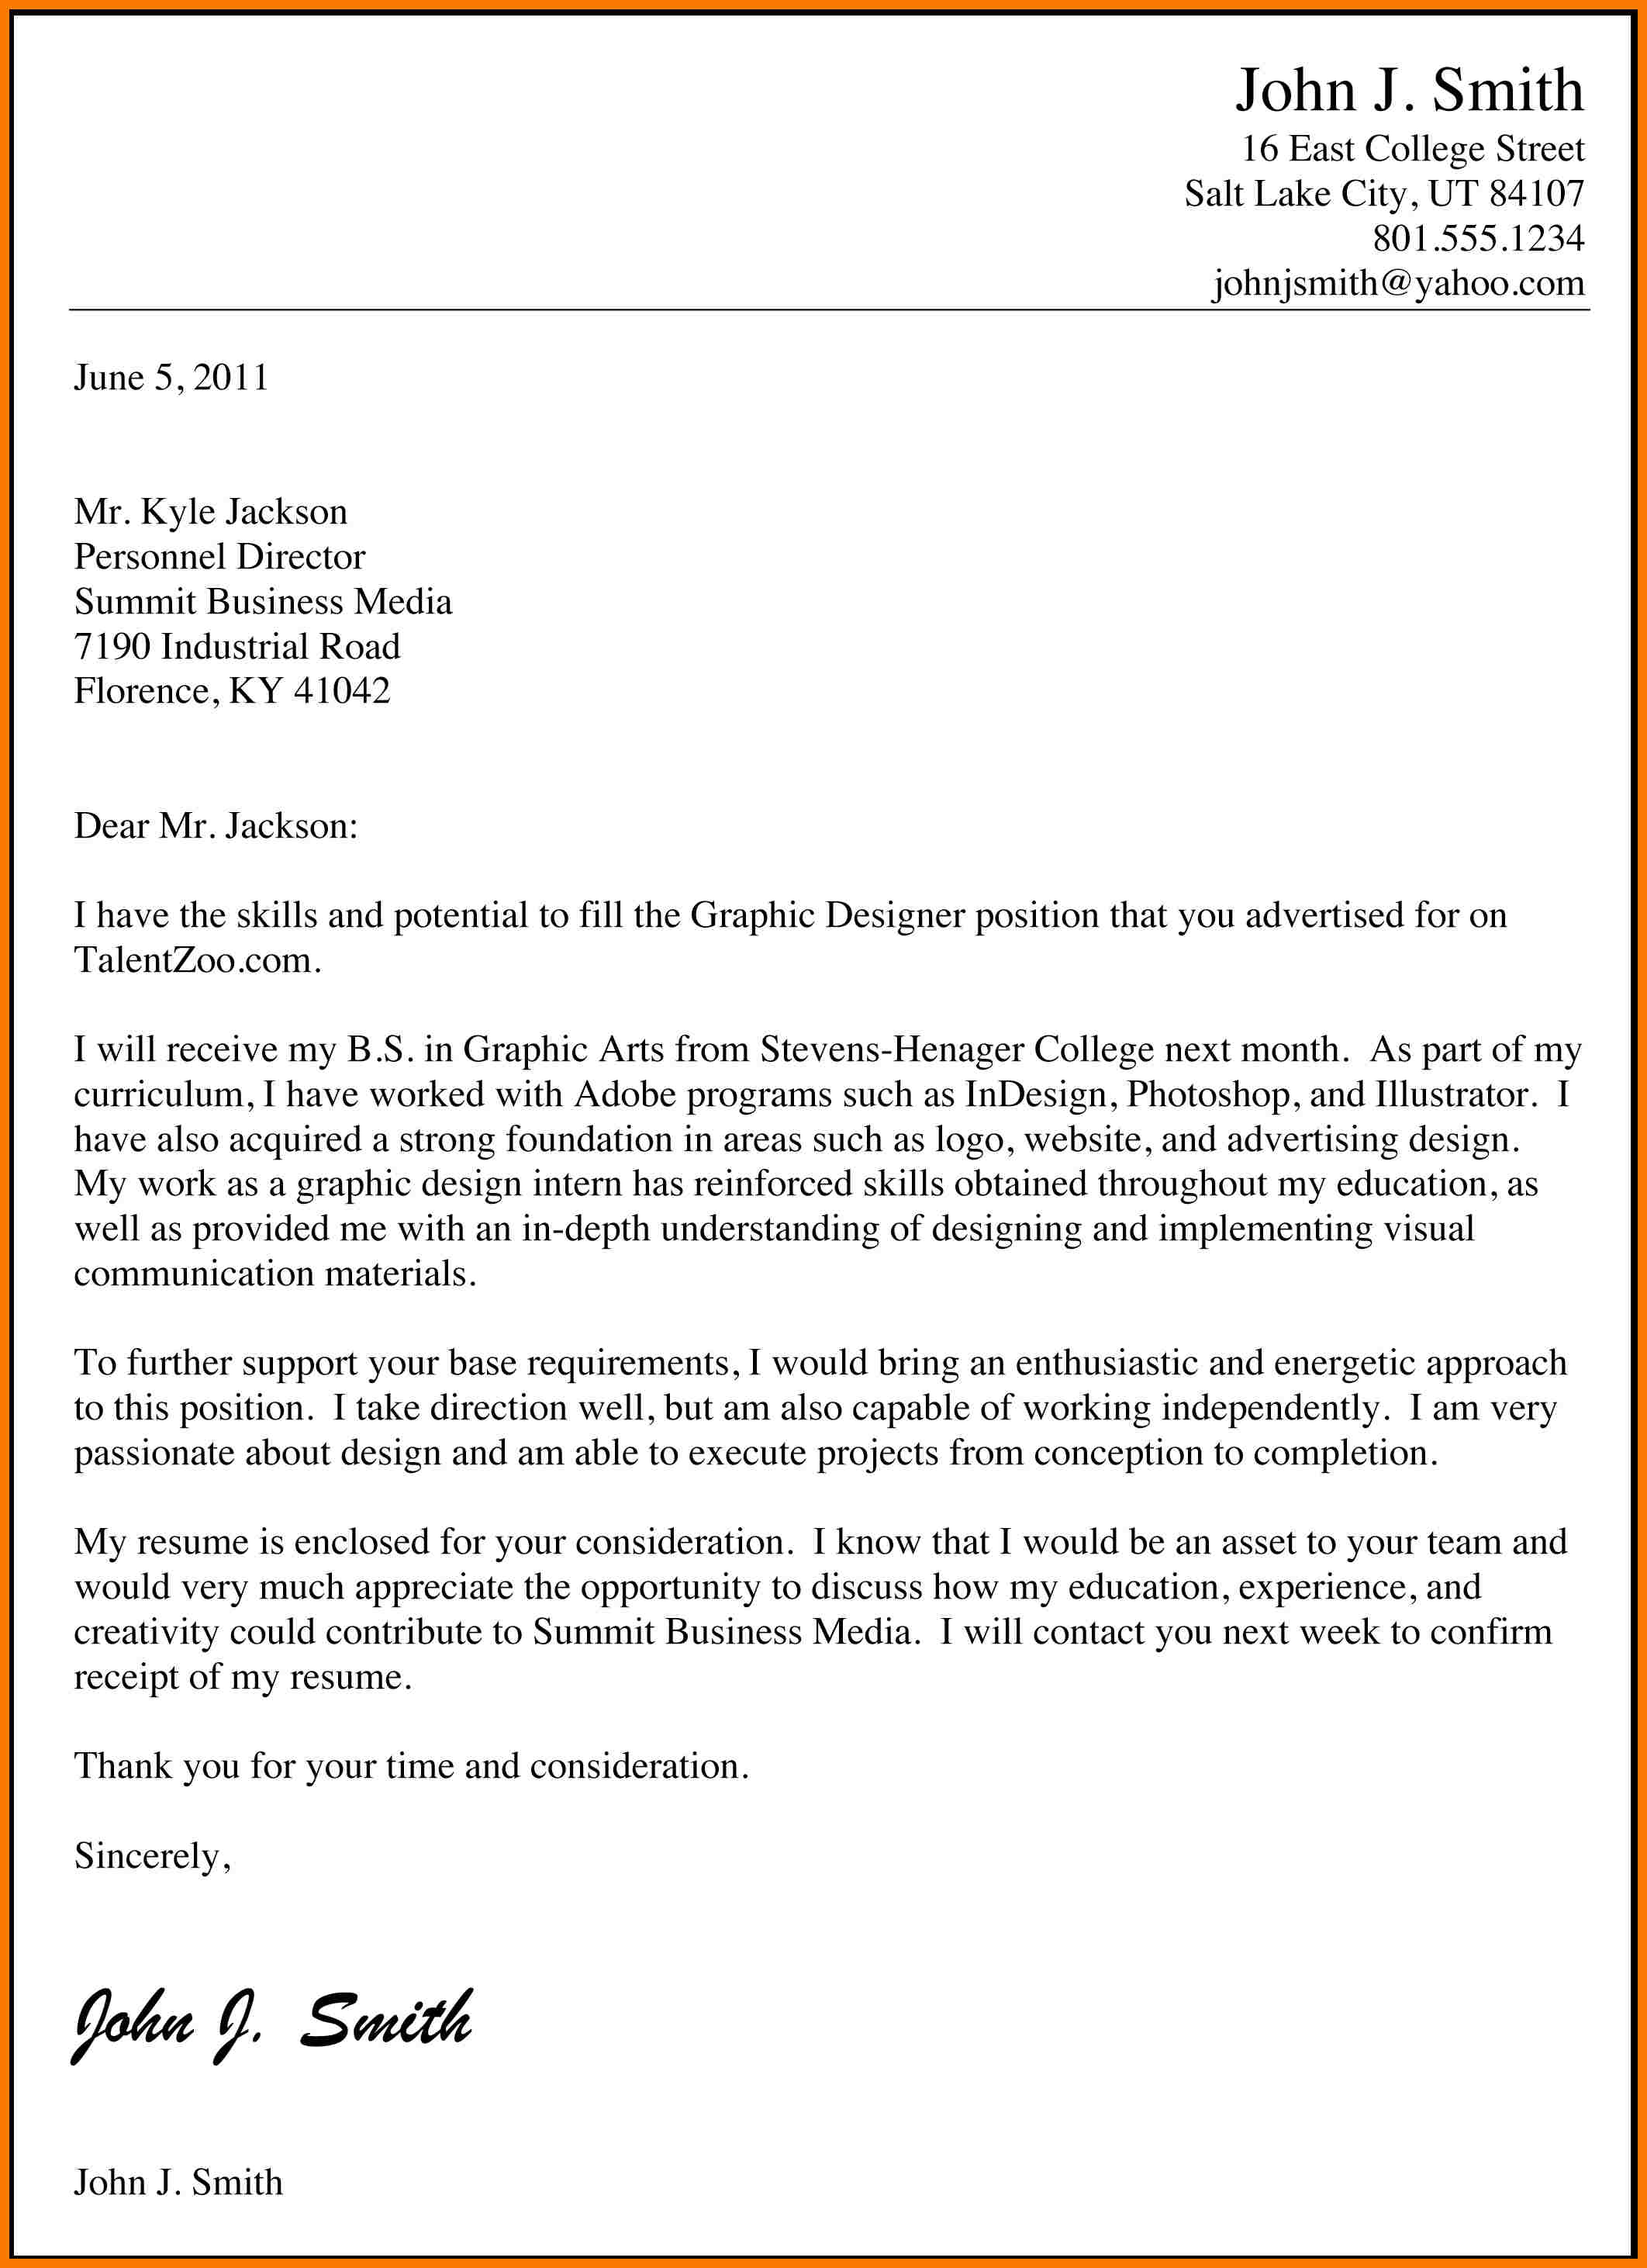 9+ Official Job Application Letter Examples - PDF | Examples